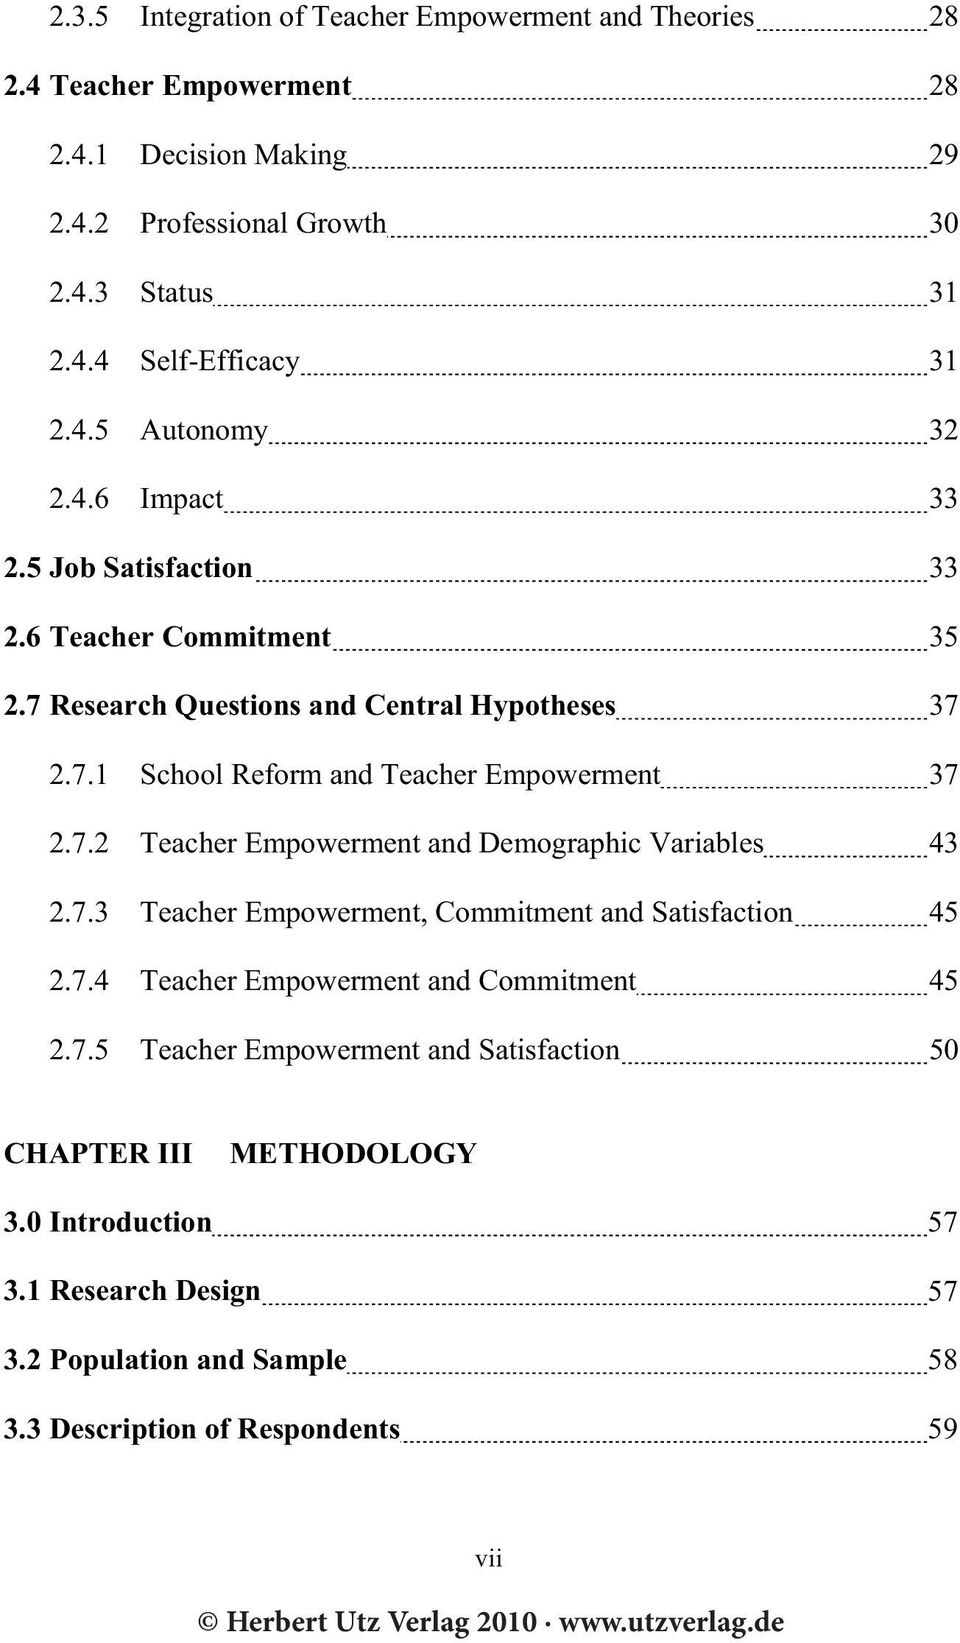 7.2 Teacher Empowerment and Demographic Variables 43 2.7.3 Teacher Empowerment, Commitment and Satisfaction 45 2.7.4 Teacher Empowerment and Commitment 45 2.7.5 Teacher Empowerment and Satisfaction 50 CHAPTER III METHODOLOGY 3.